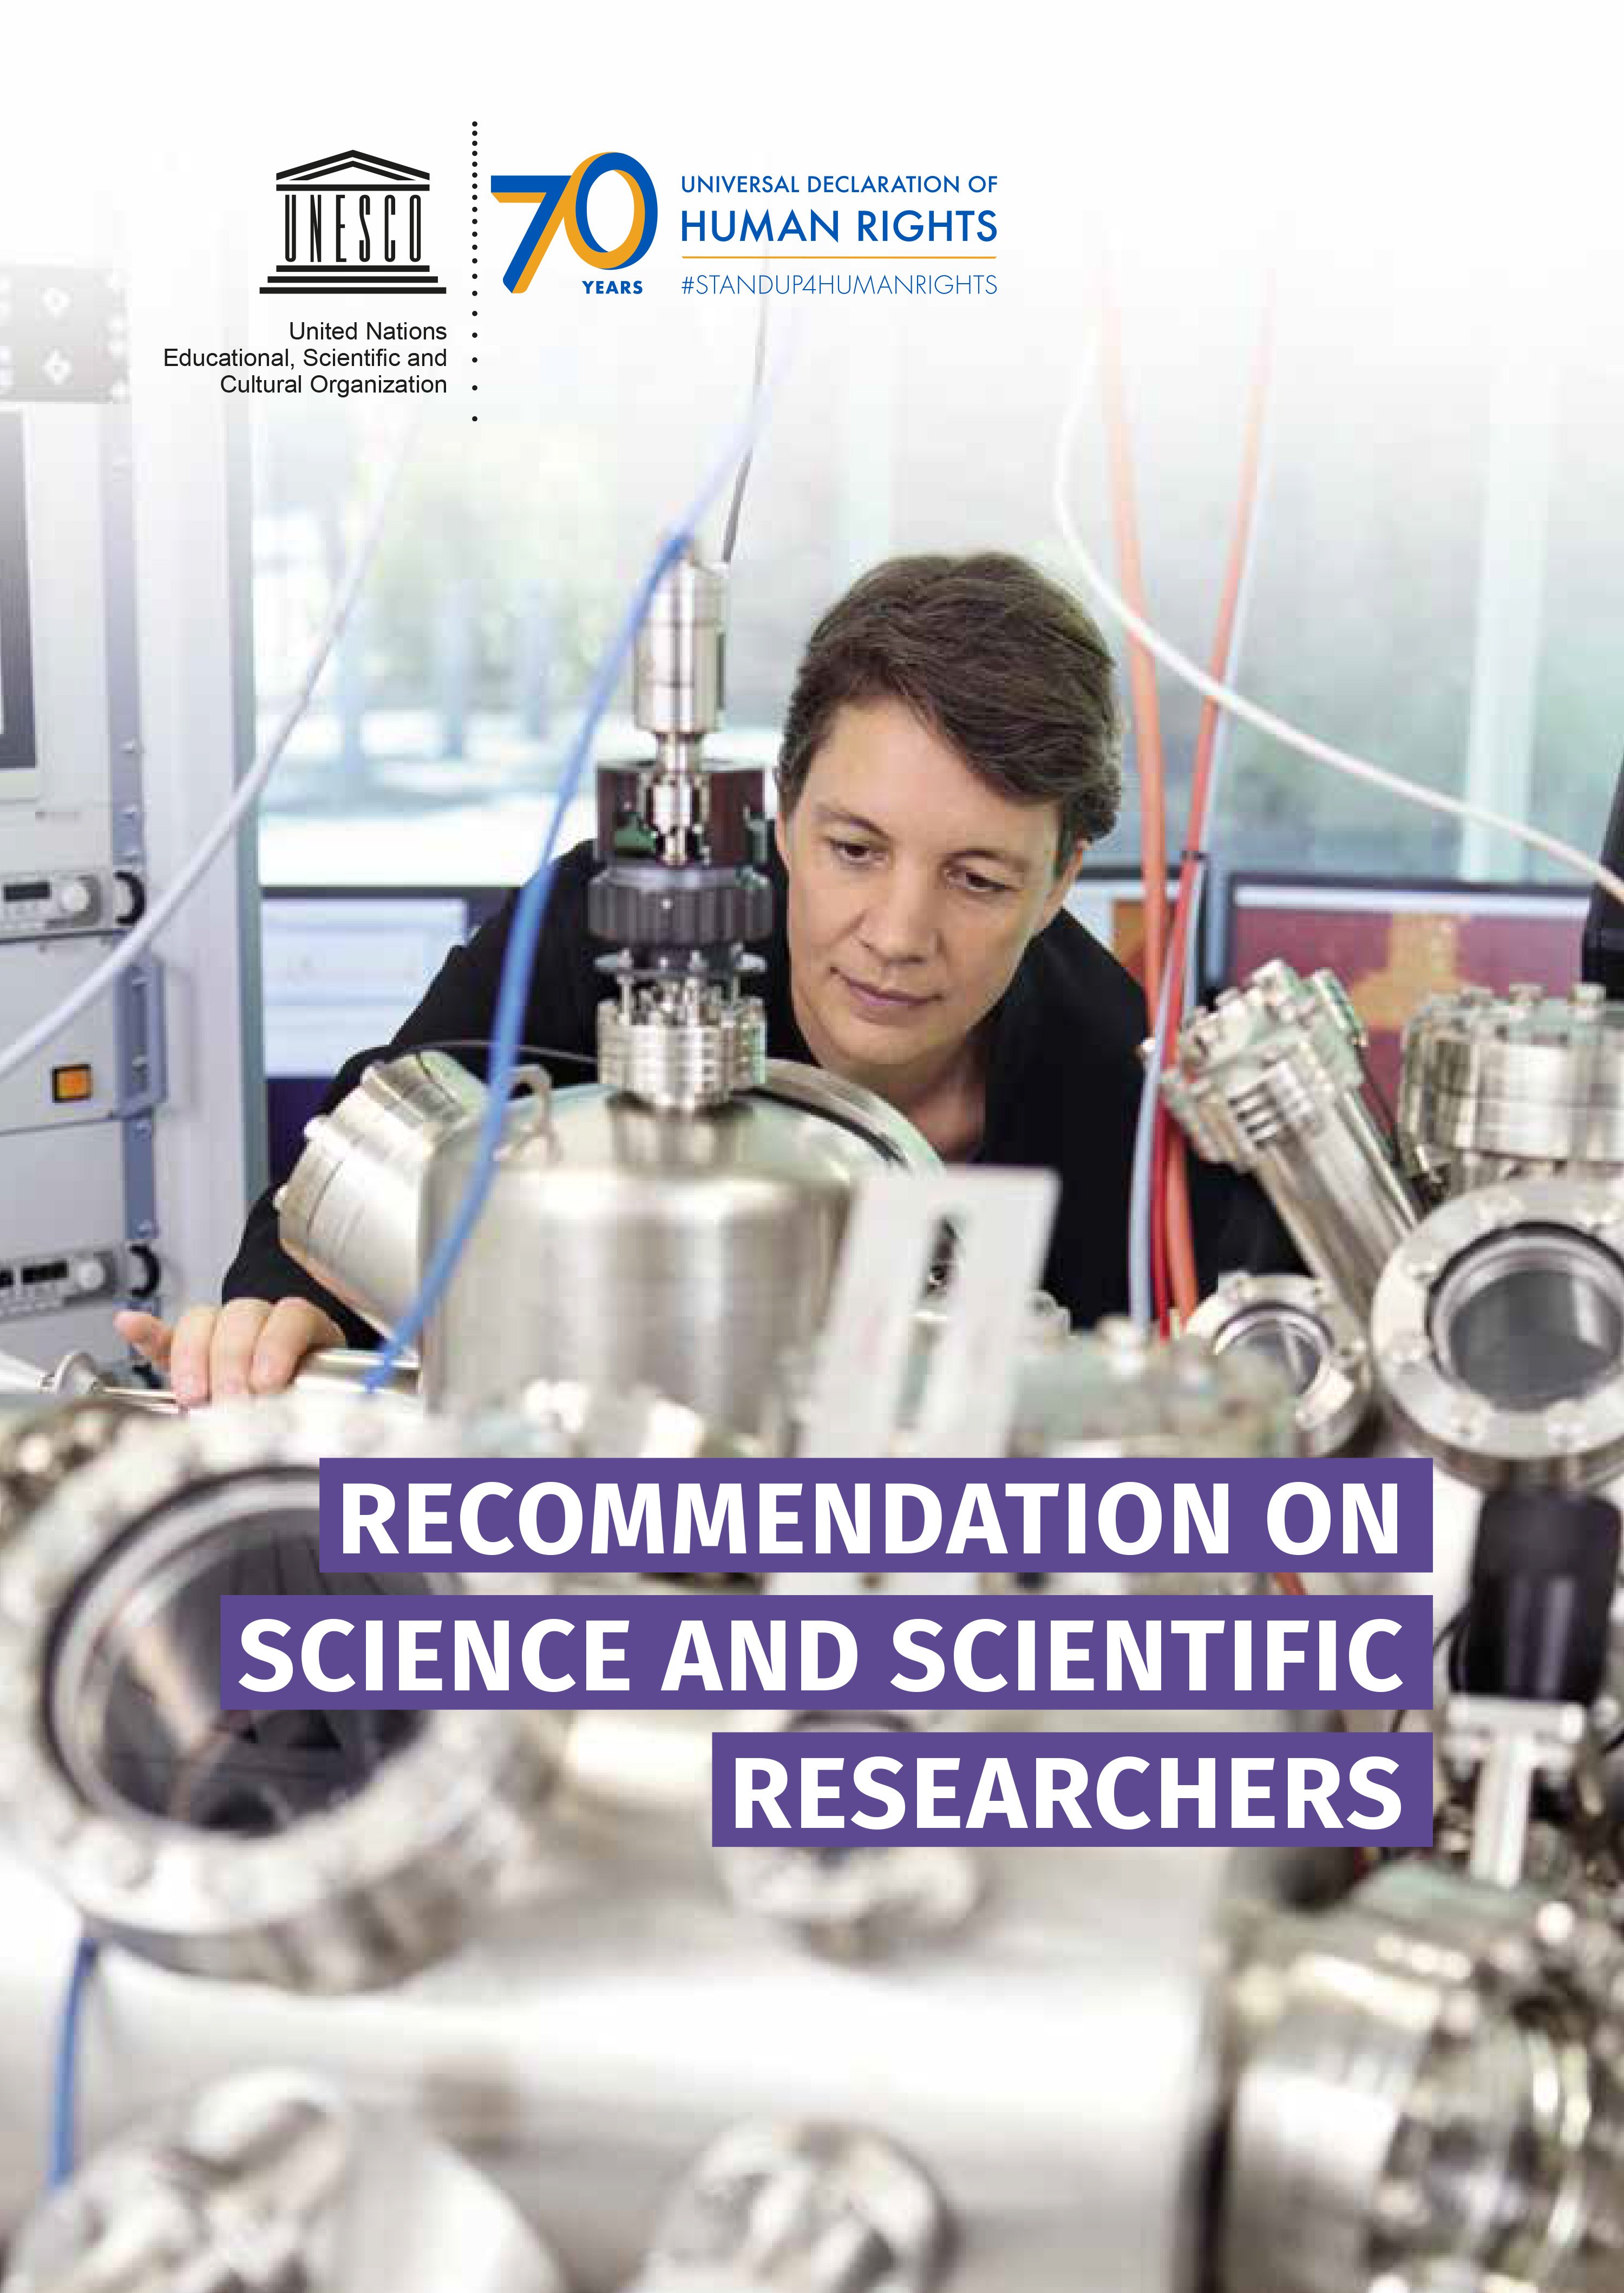 Recommondation on science and scientific researchers